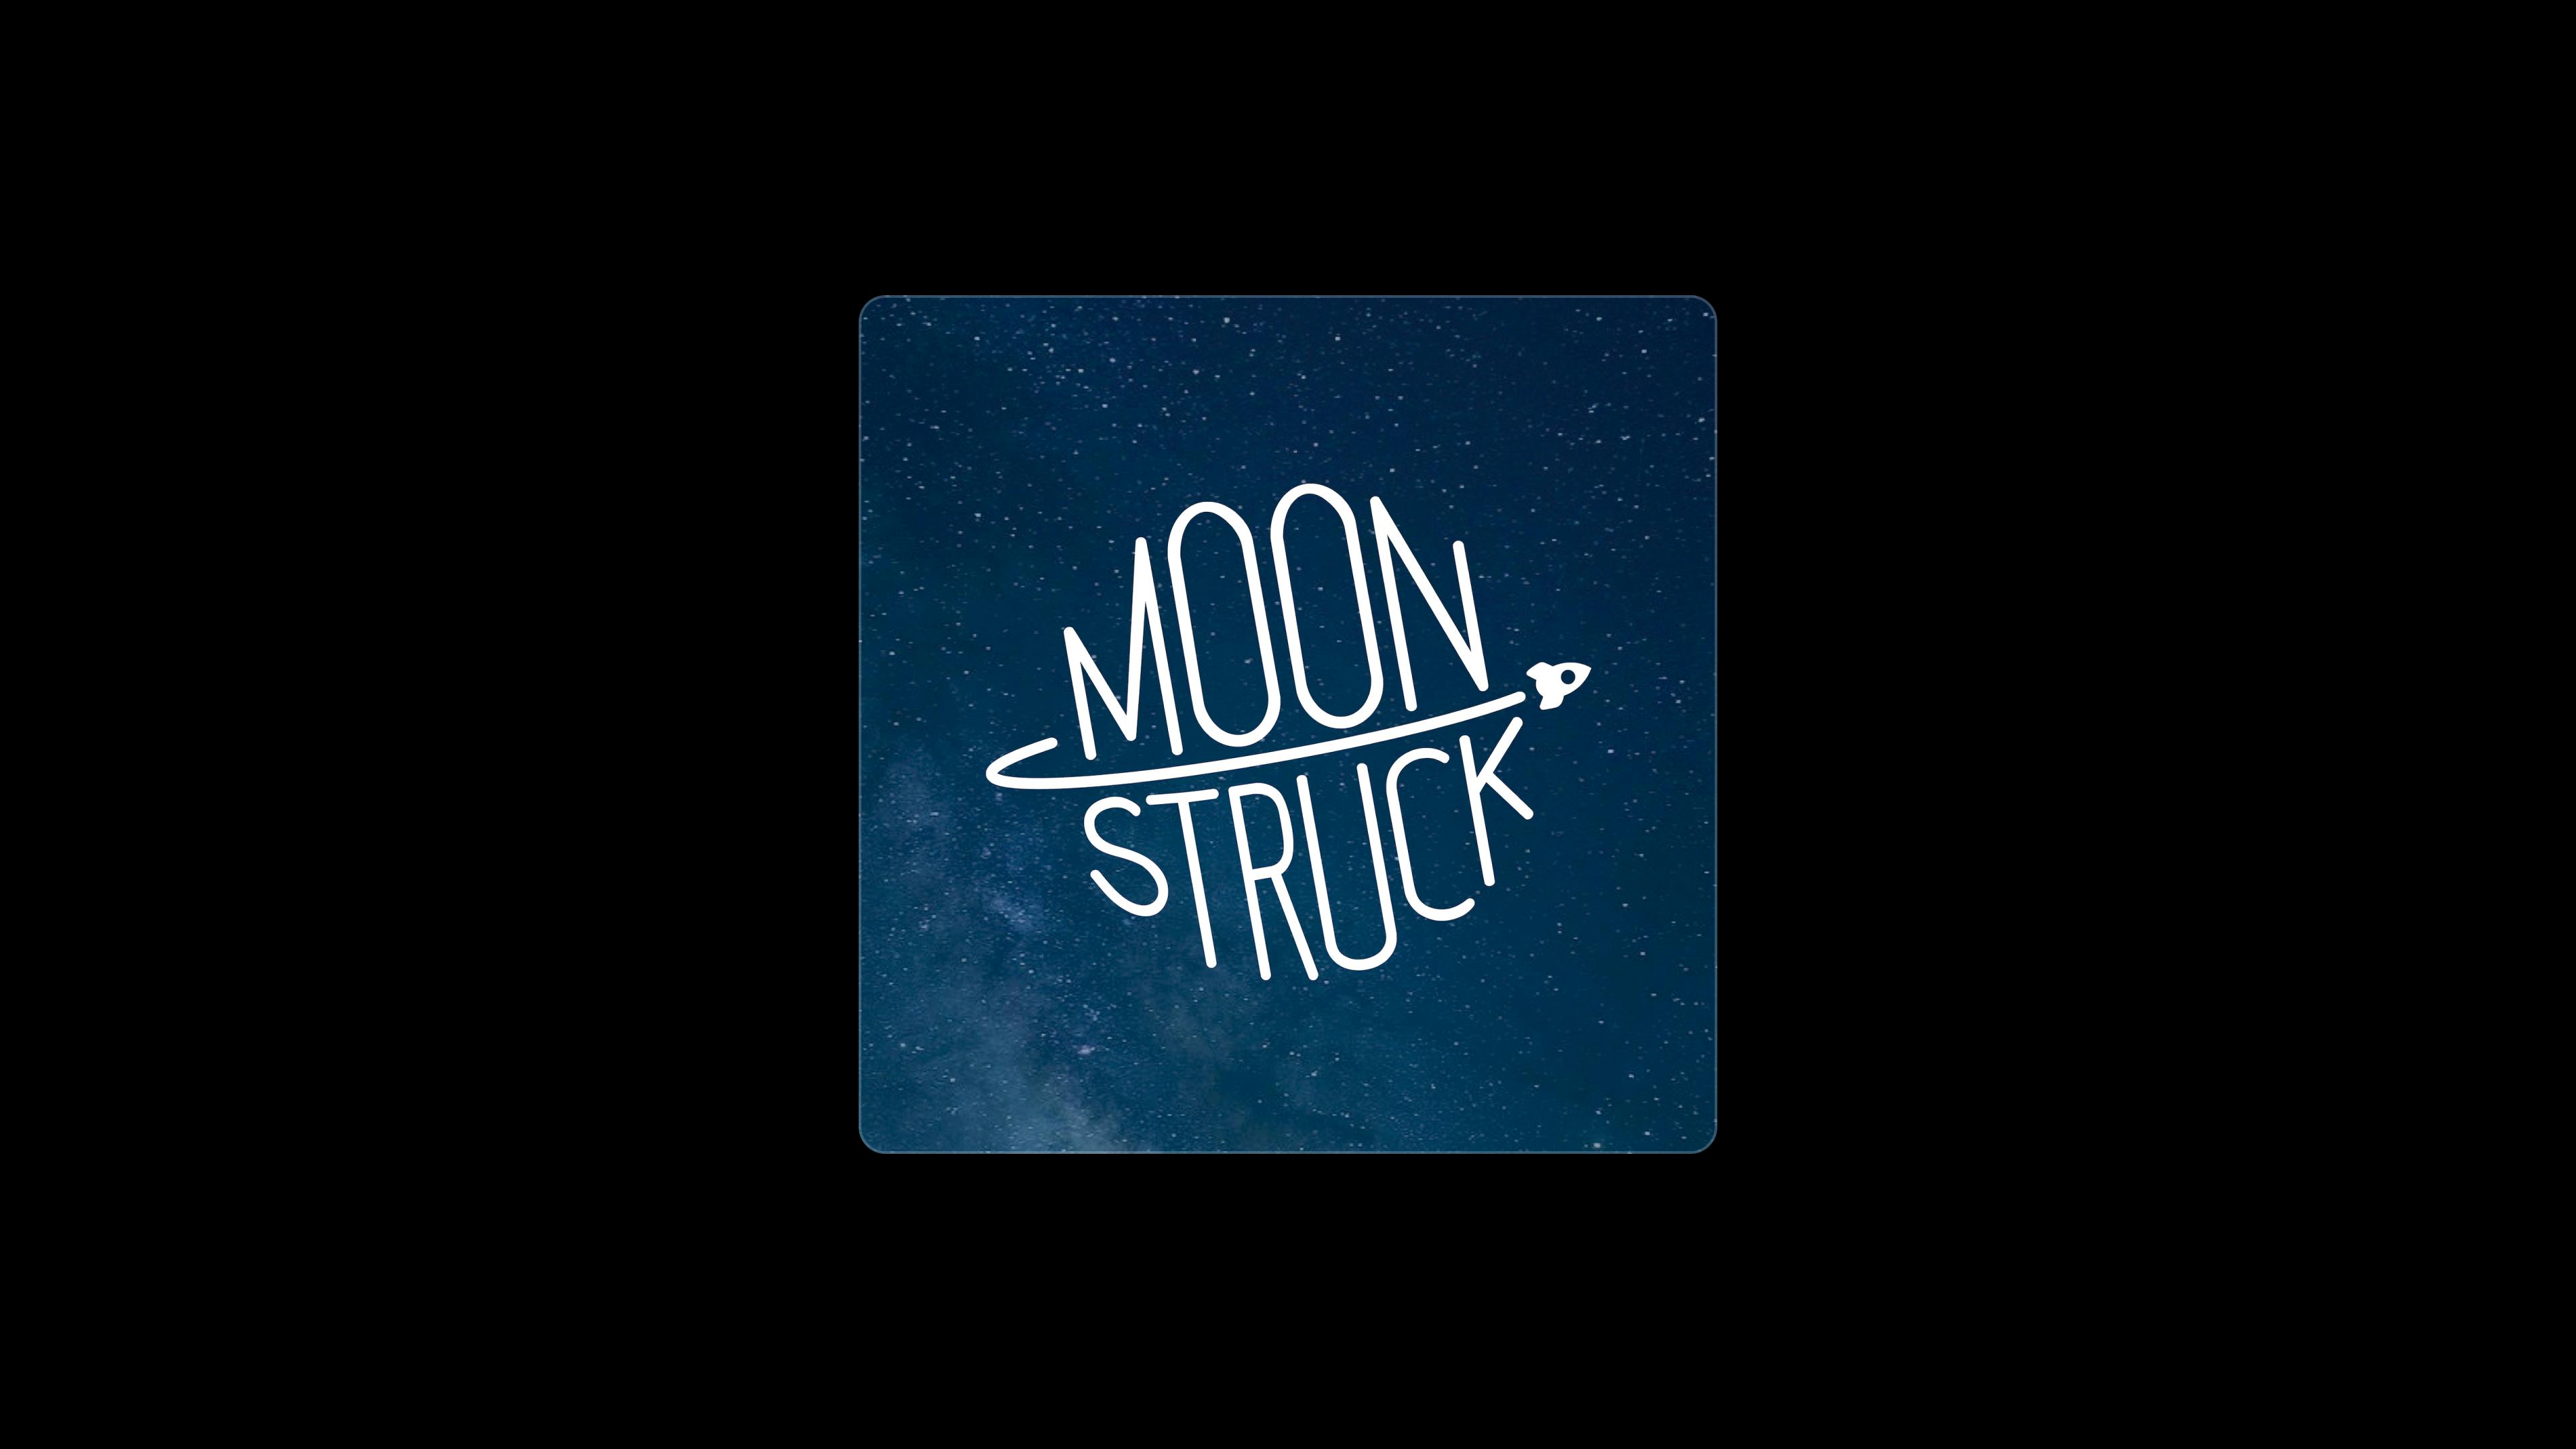 Moonstruck space podcast